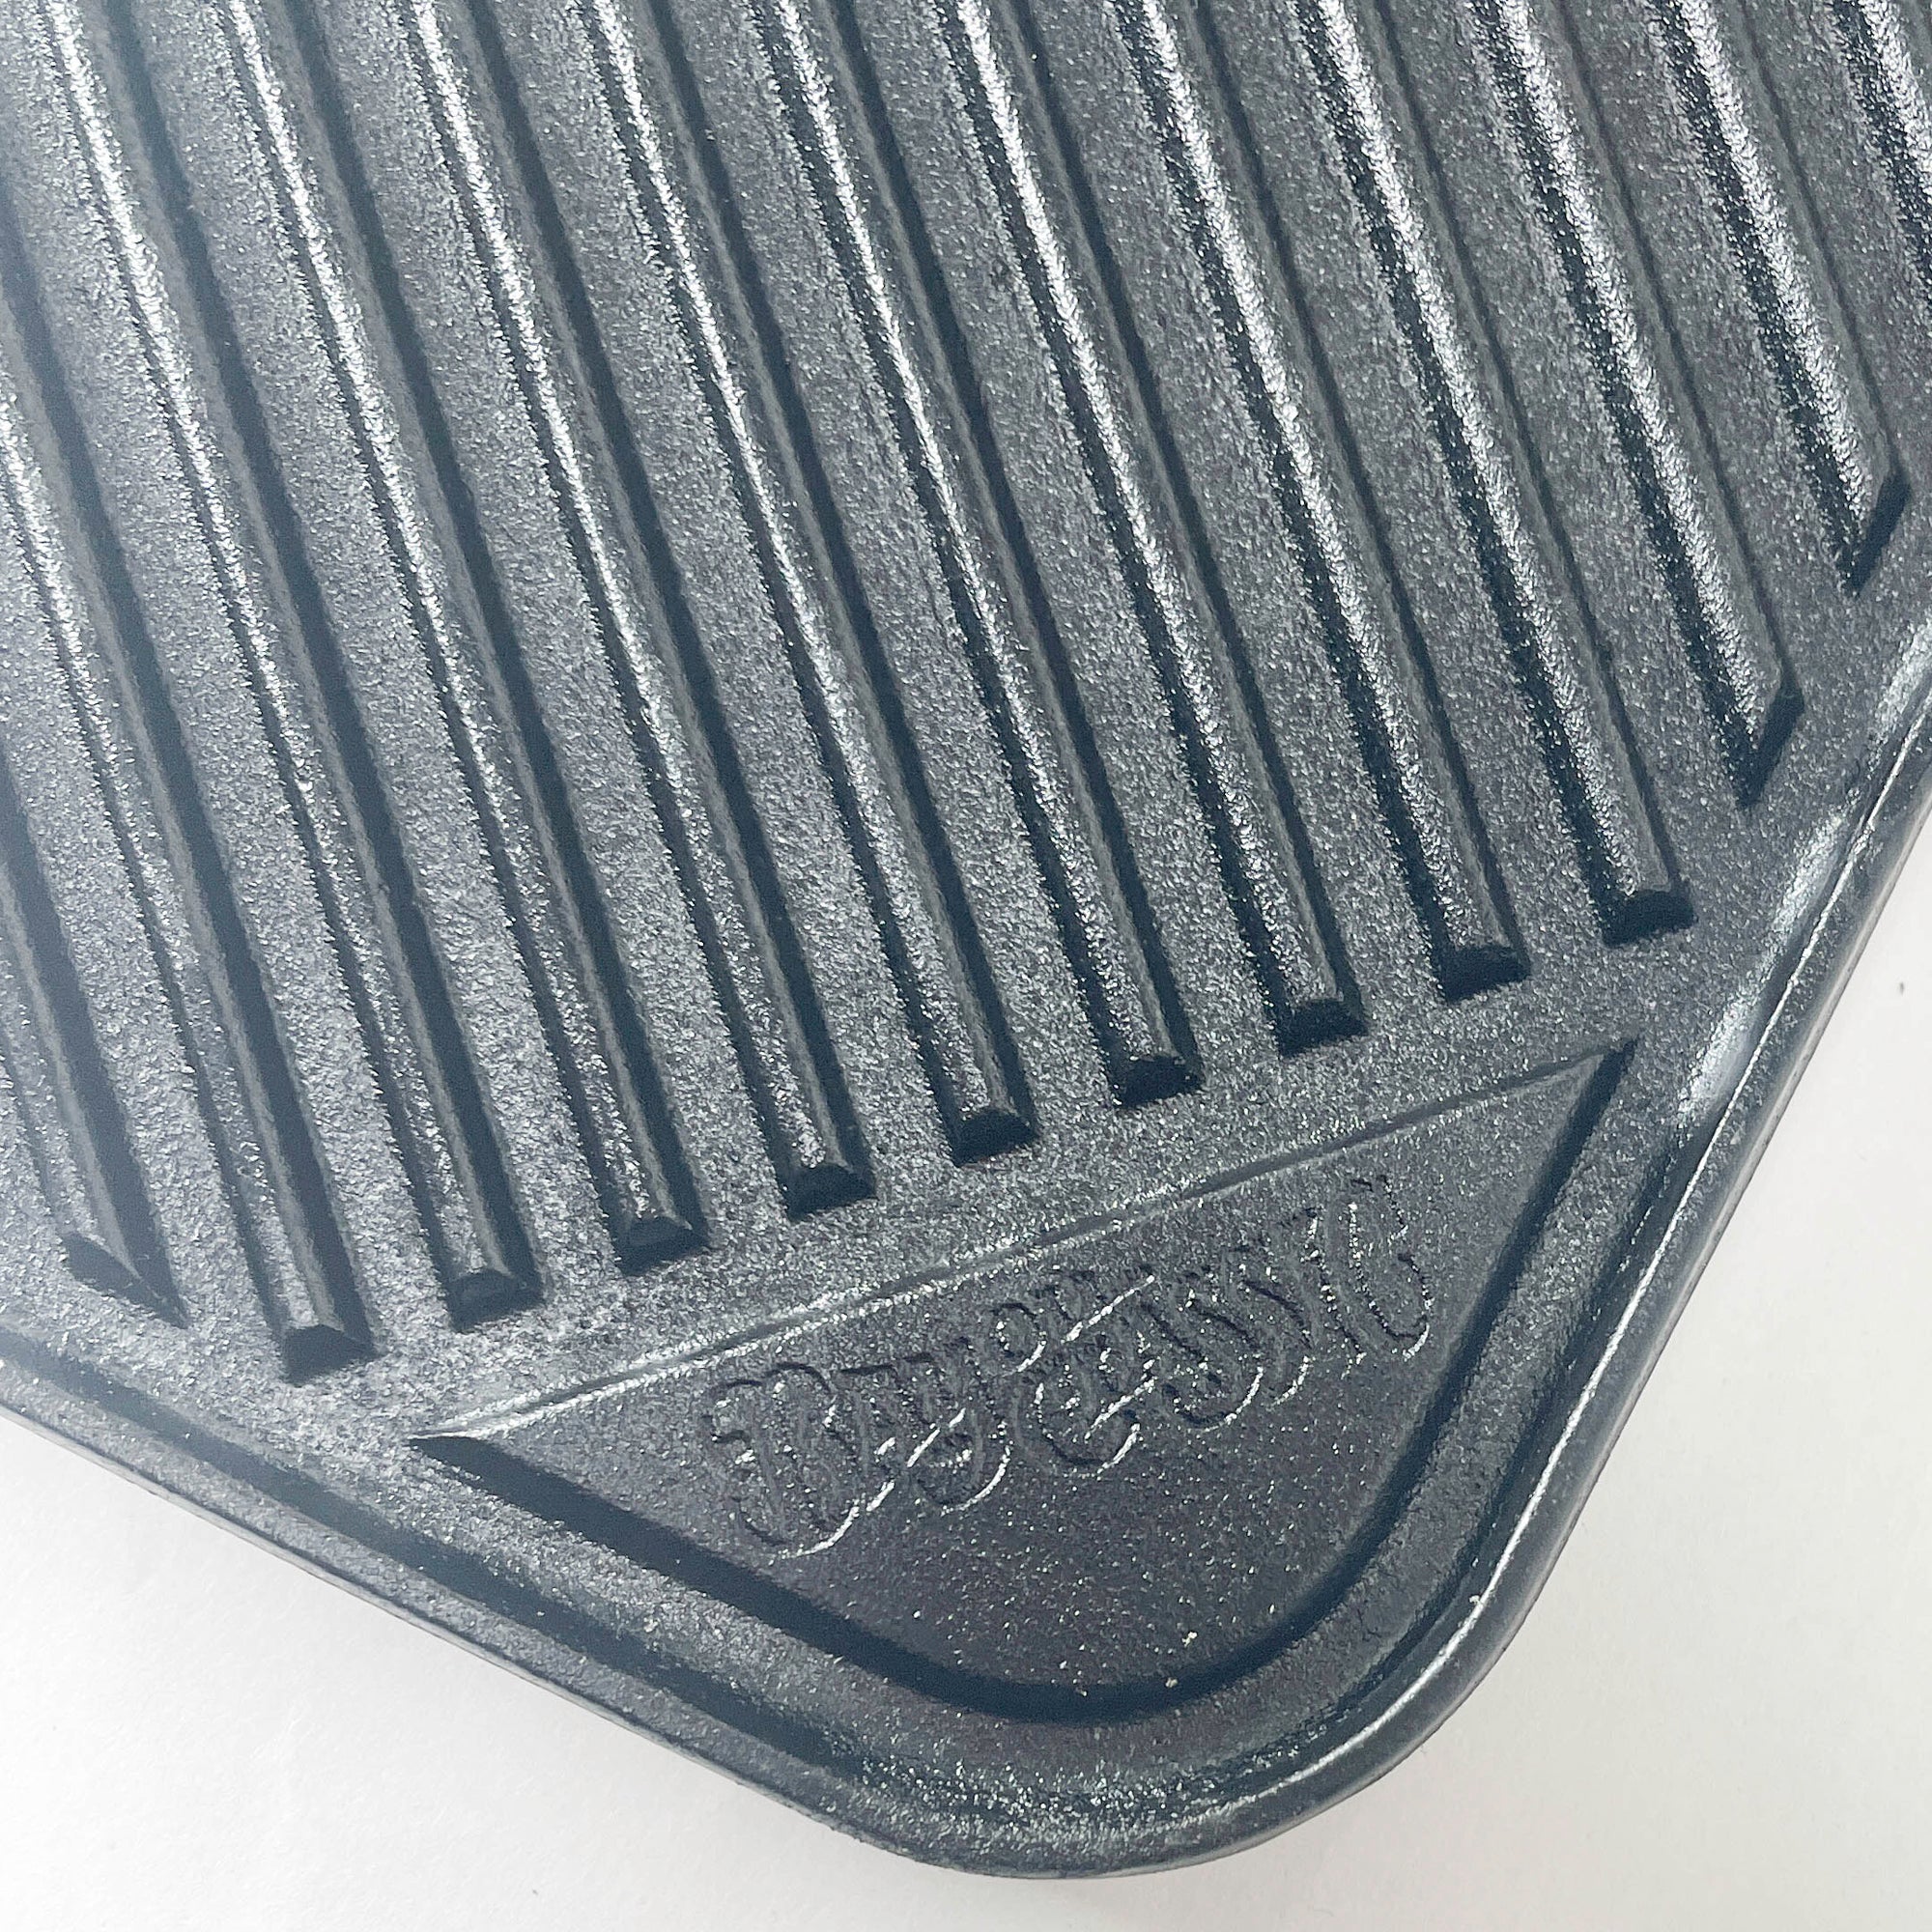 14-in Cast Iron Reversible Square Griddle